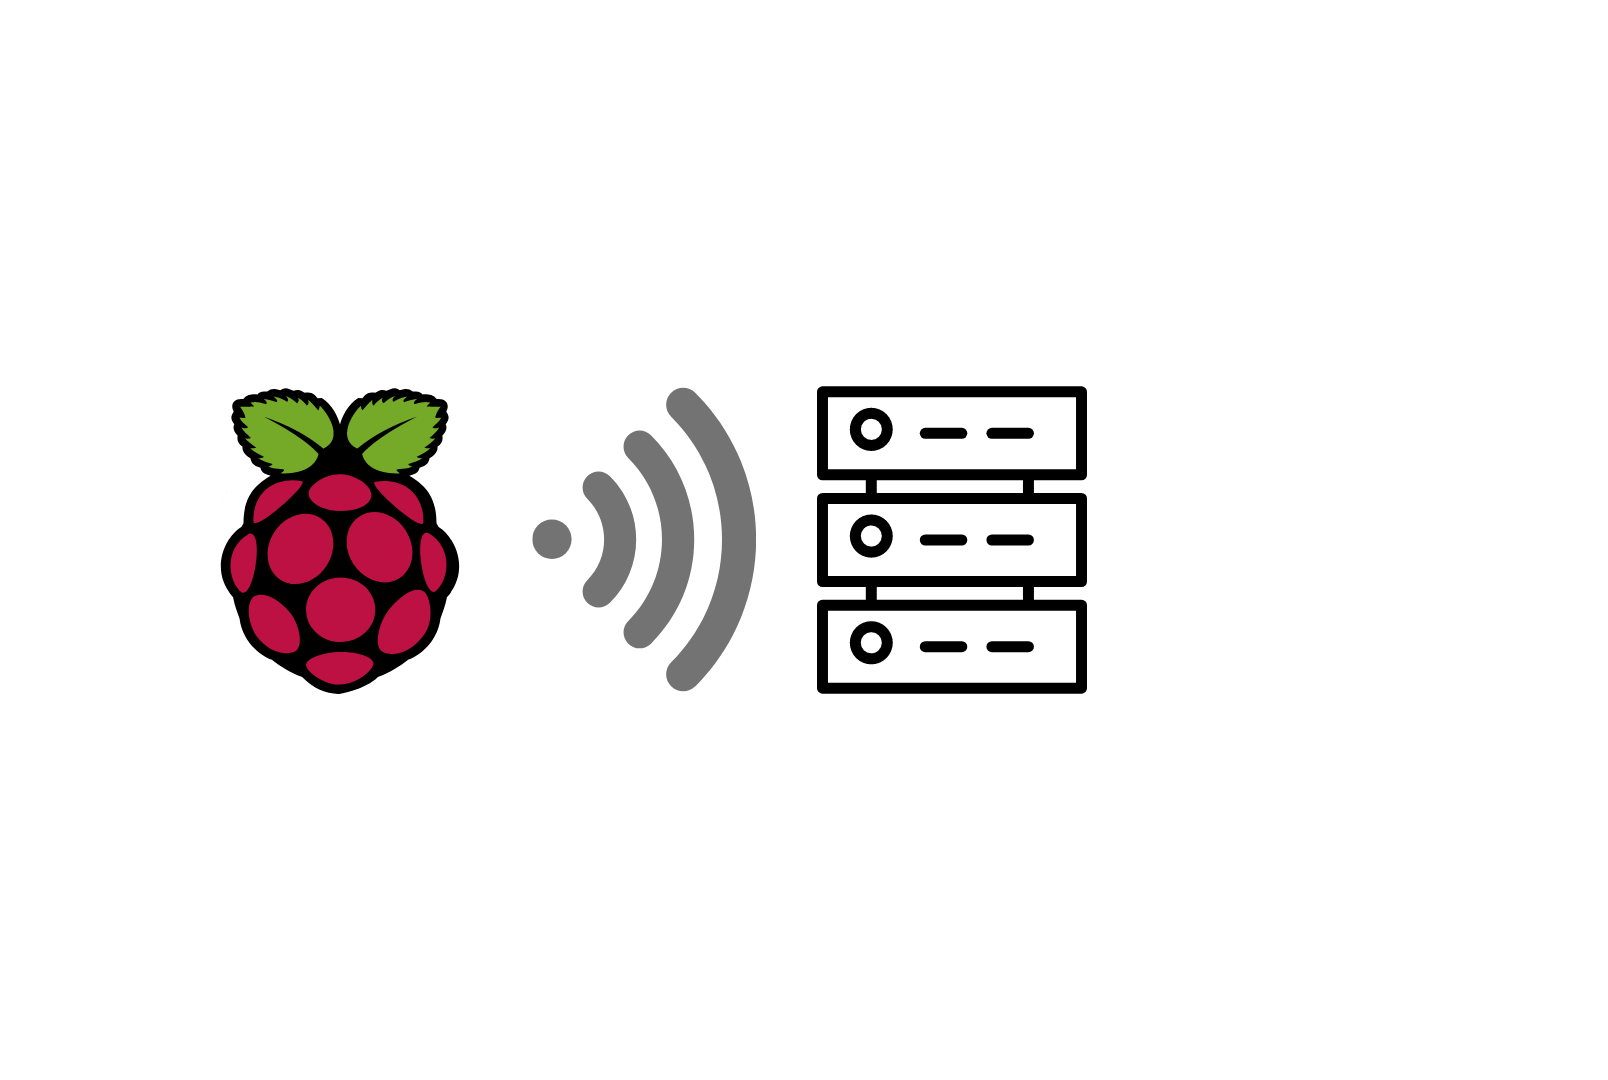 How to Connect to an FTP Server With Raspberry Pi Pico W